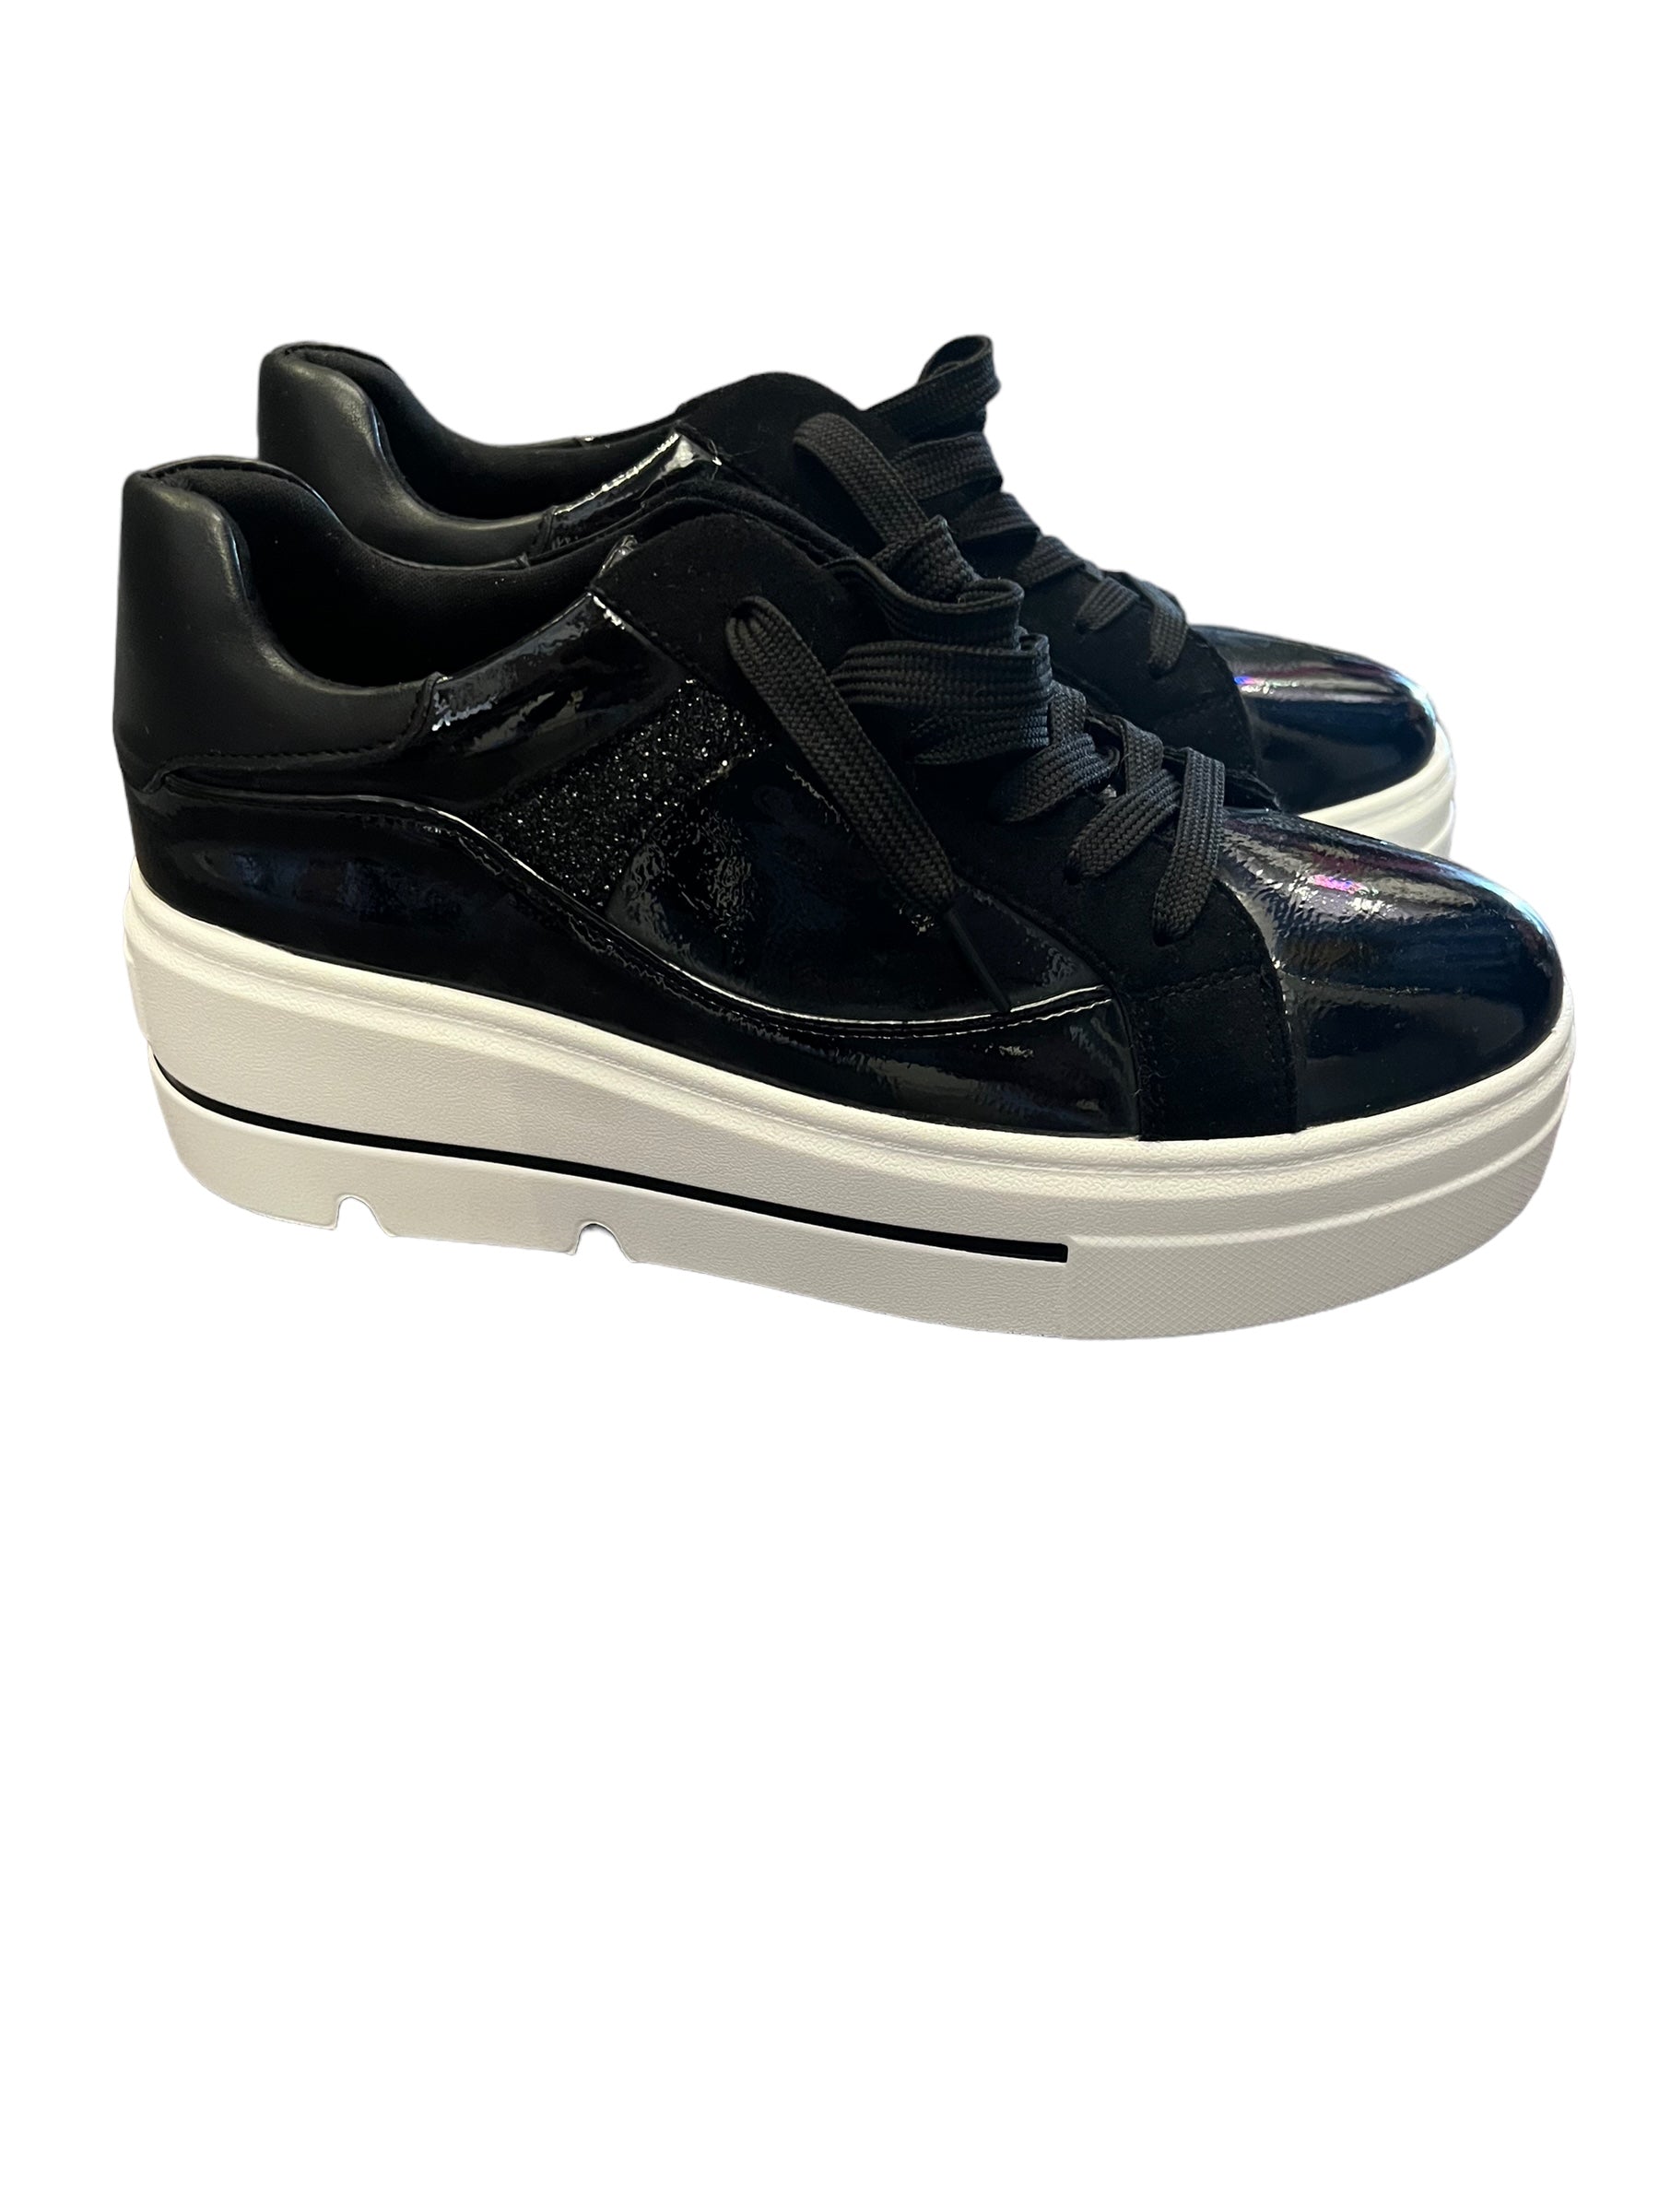 Queen Helena black trainers size 38